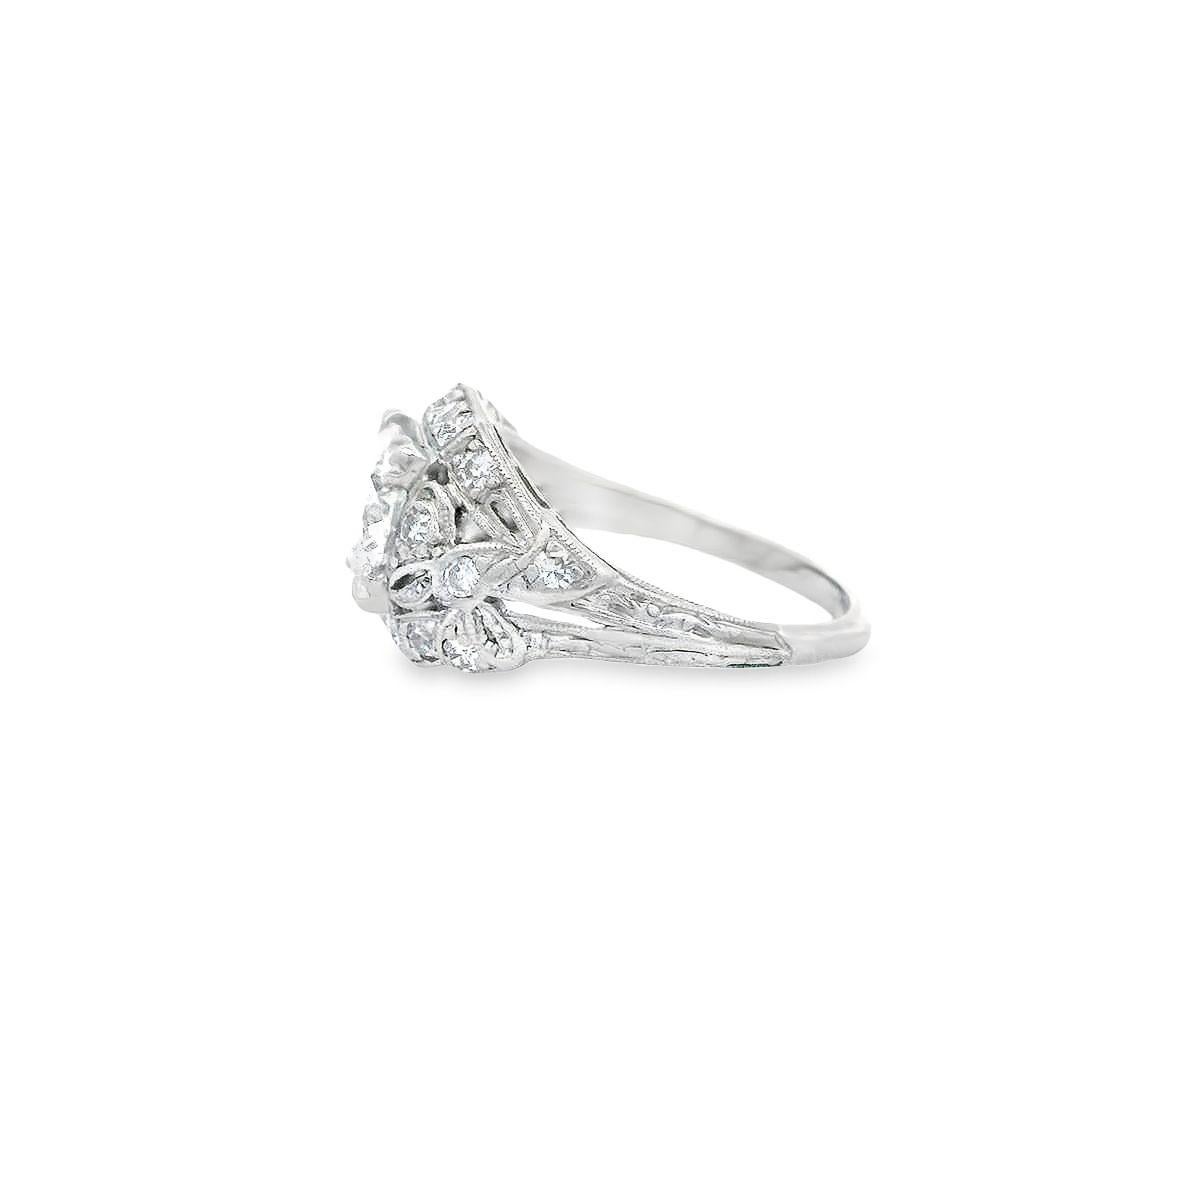 A captivating vintage diamond ring offered  by Alex & Co. This refined low profile platinum ring features a triple prong set center transitional cut round diamond weighing 1.10ct with a color grade of D and SI2 clarity. On the shoulders are